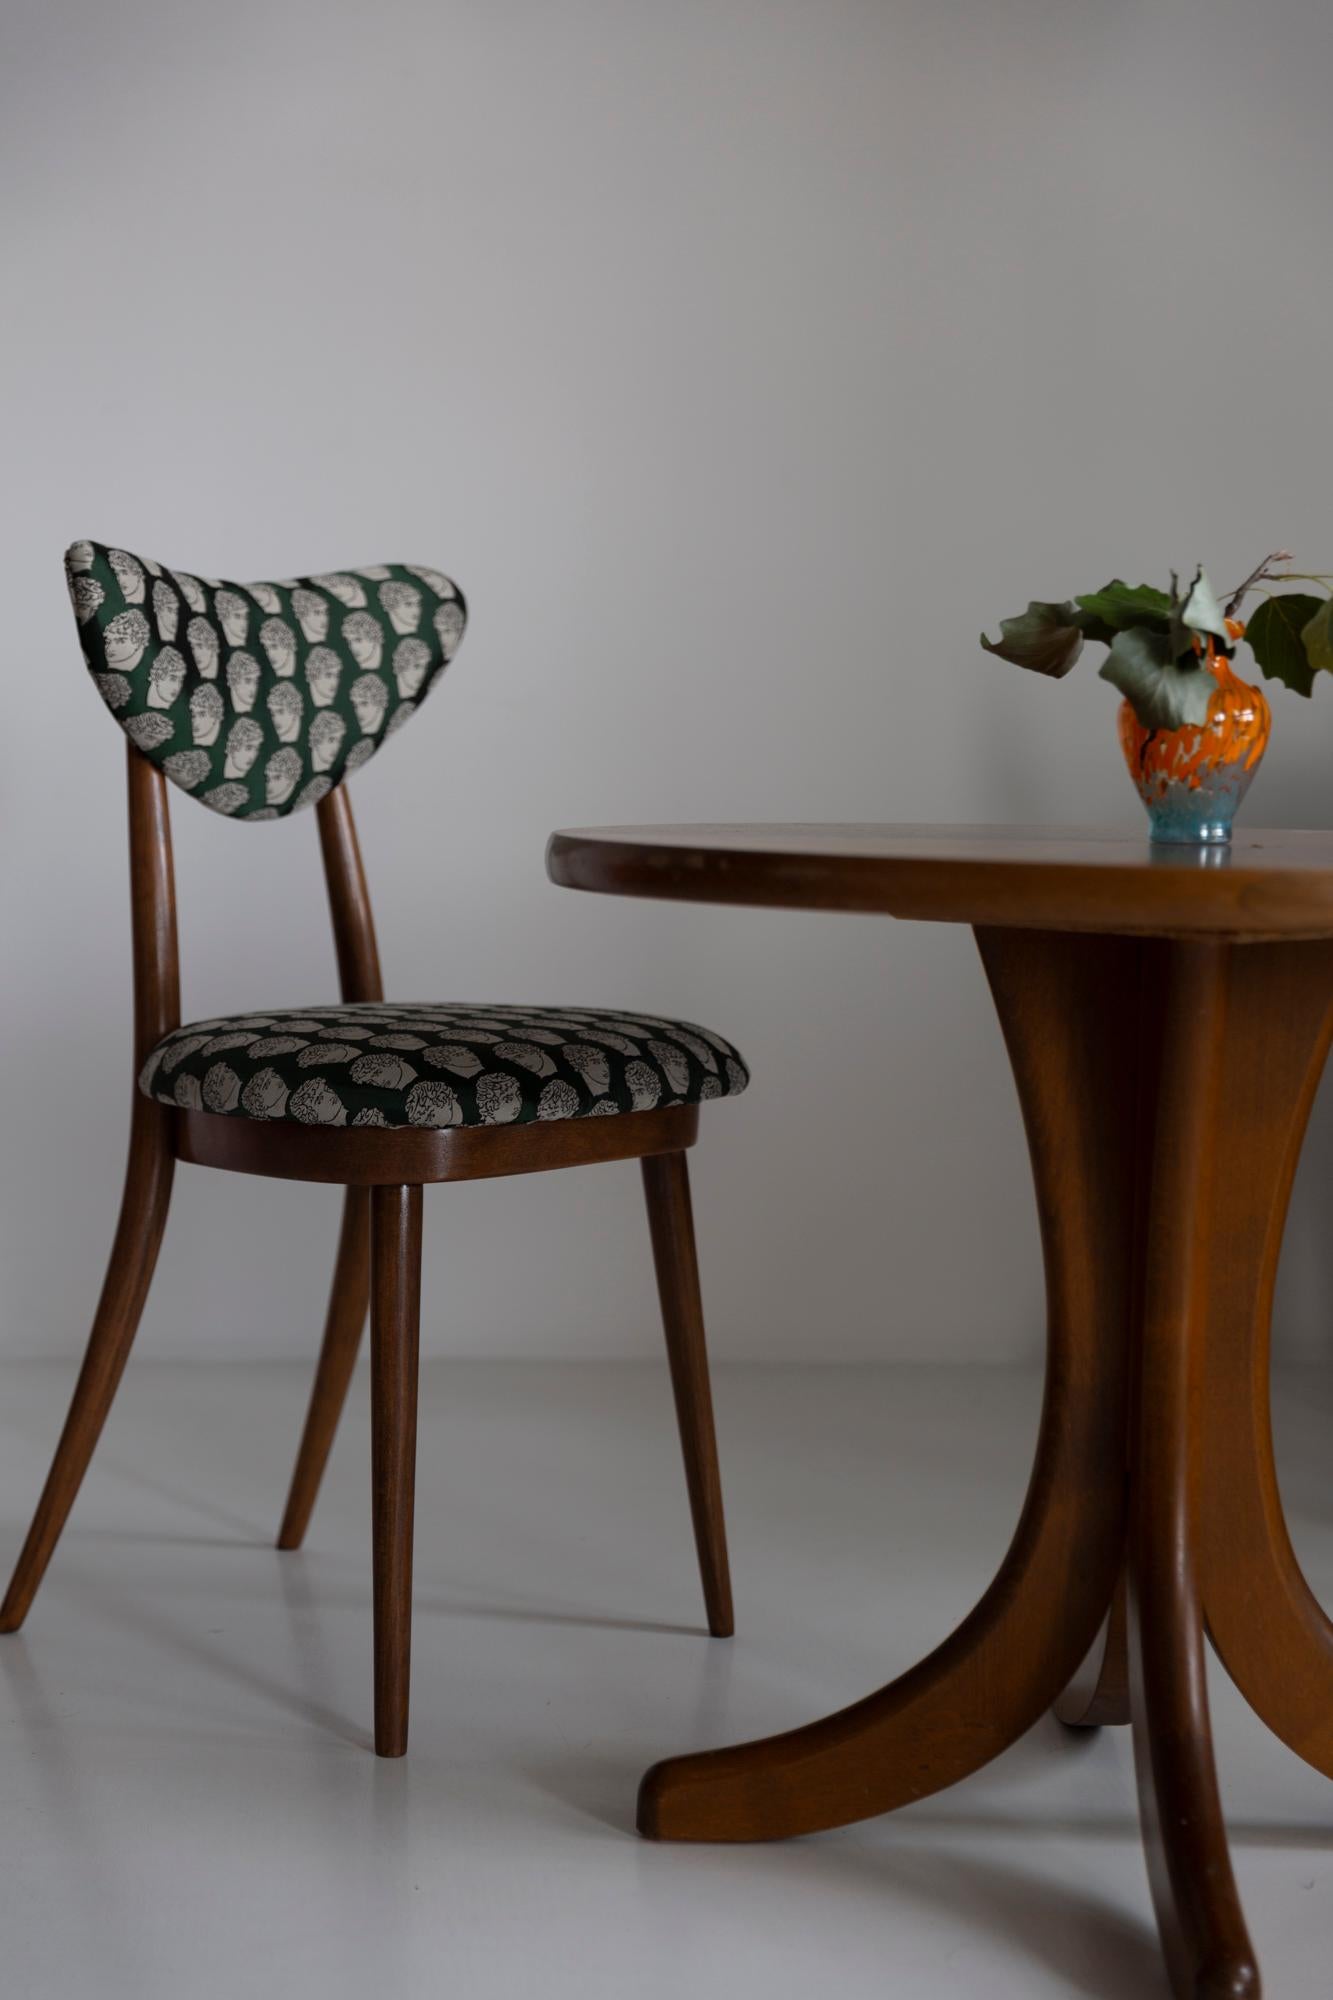 Hand-Crafted Ten Midcentury David Print Emerald Satin, Dark Wood Heart Chairs, Europe, 1960s For Sale